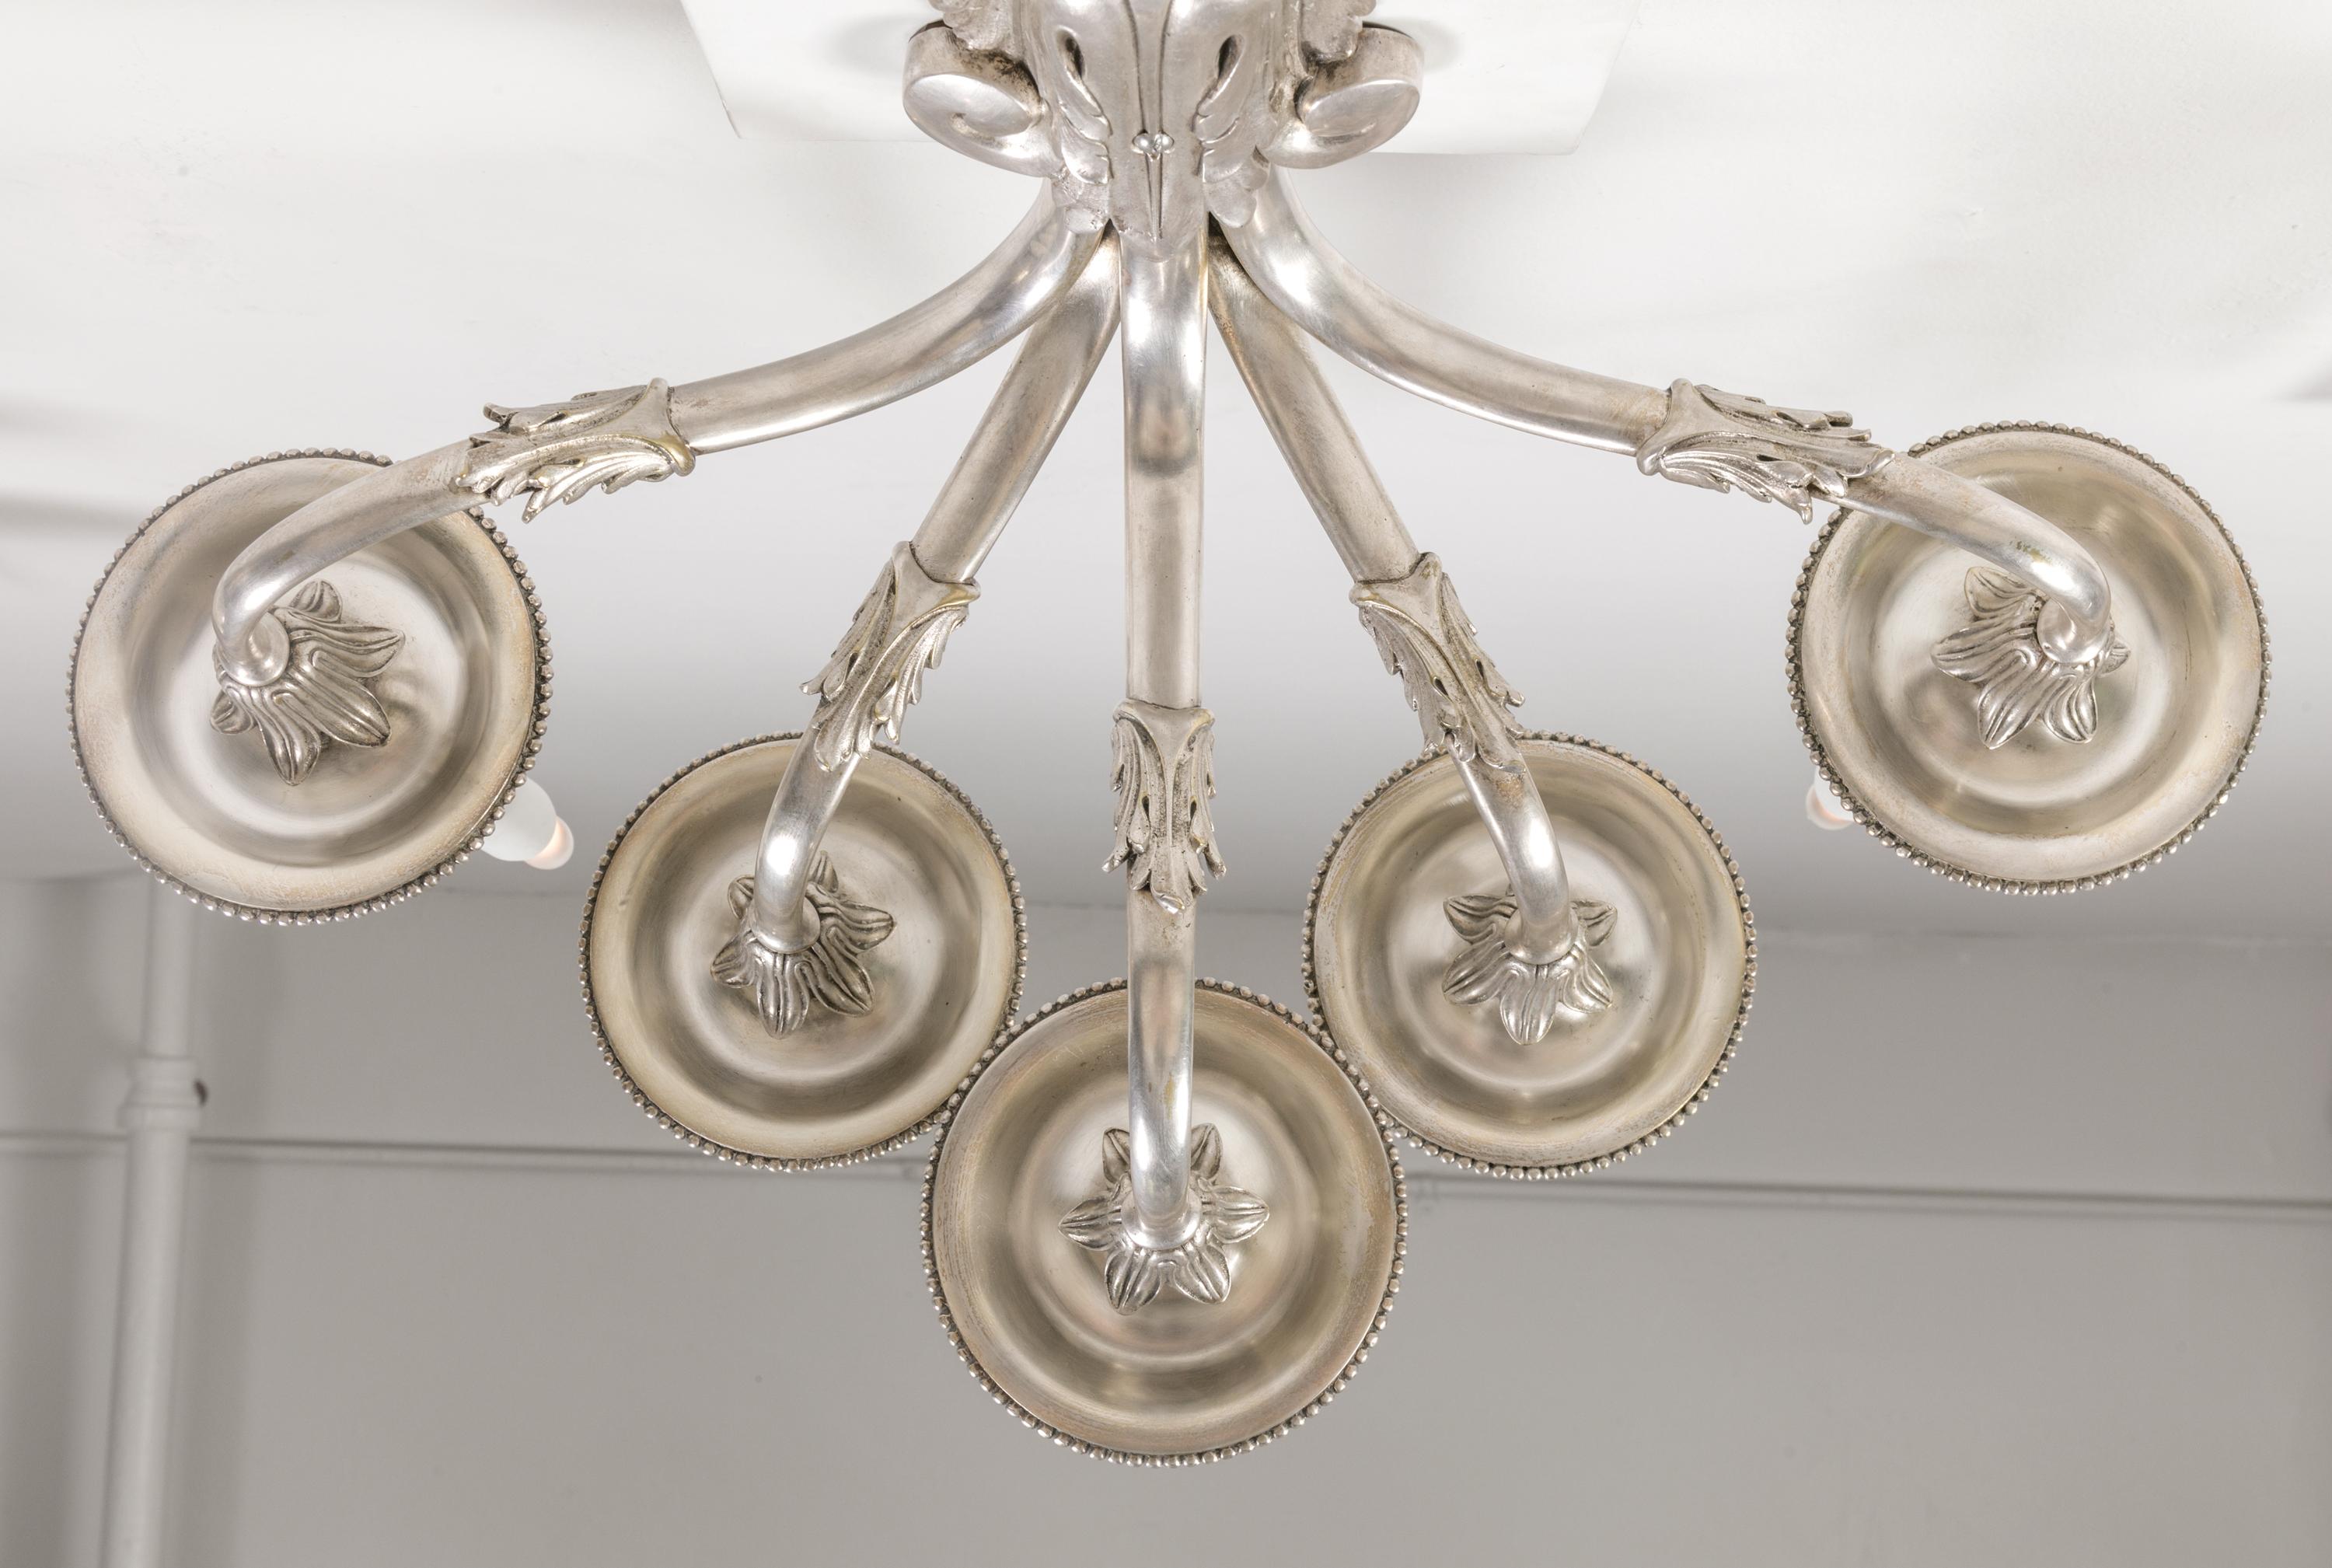 Edward F Caldwell & Co. Silvered Bronze Neoclassical Revival Sconces, USA 1900s For Sale 1